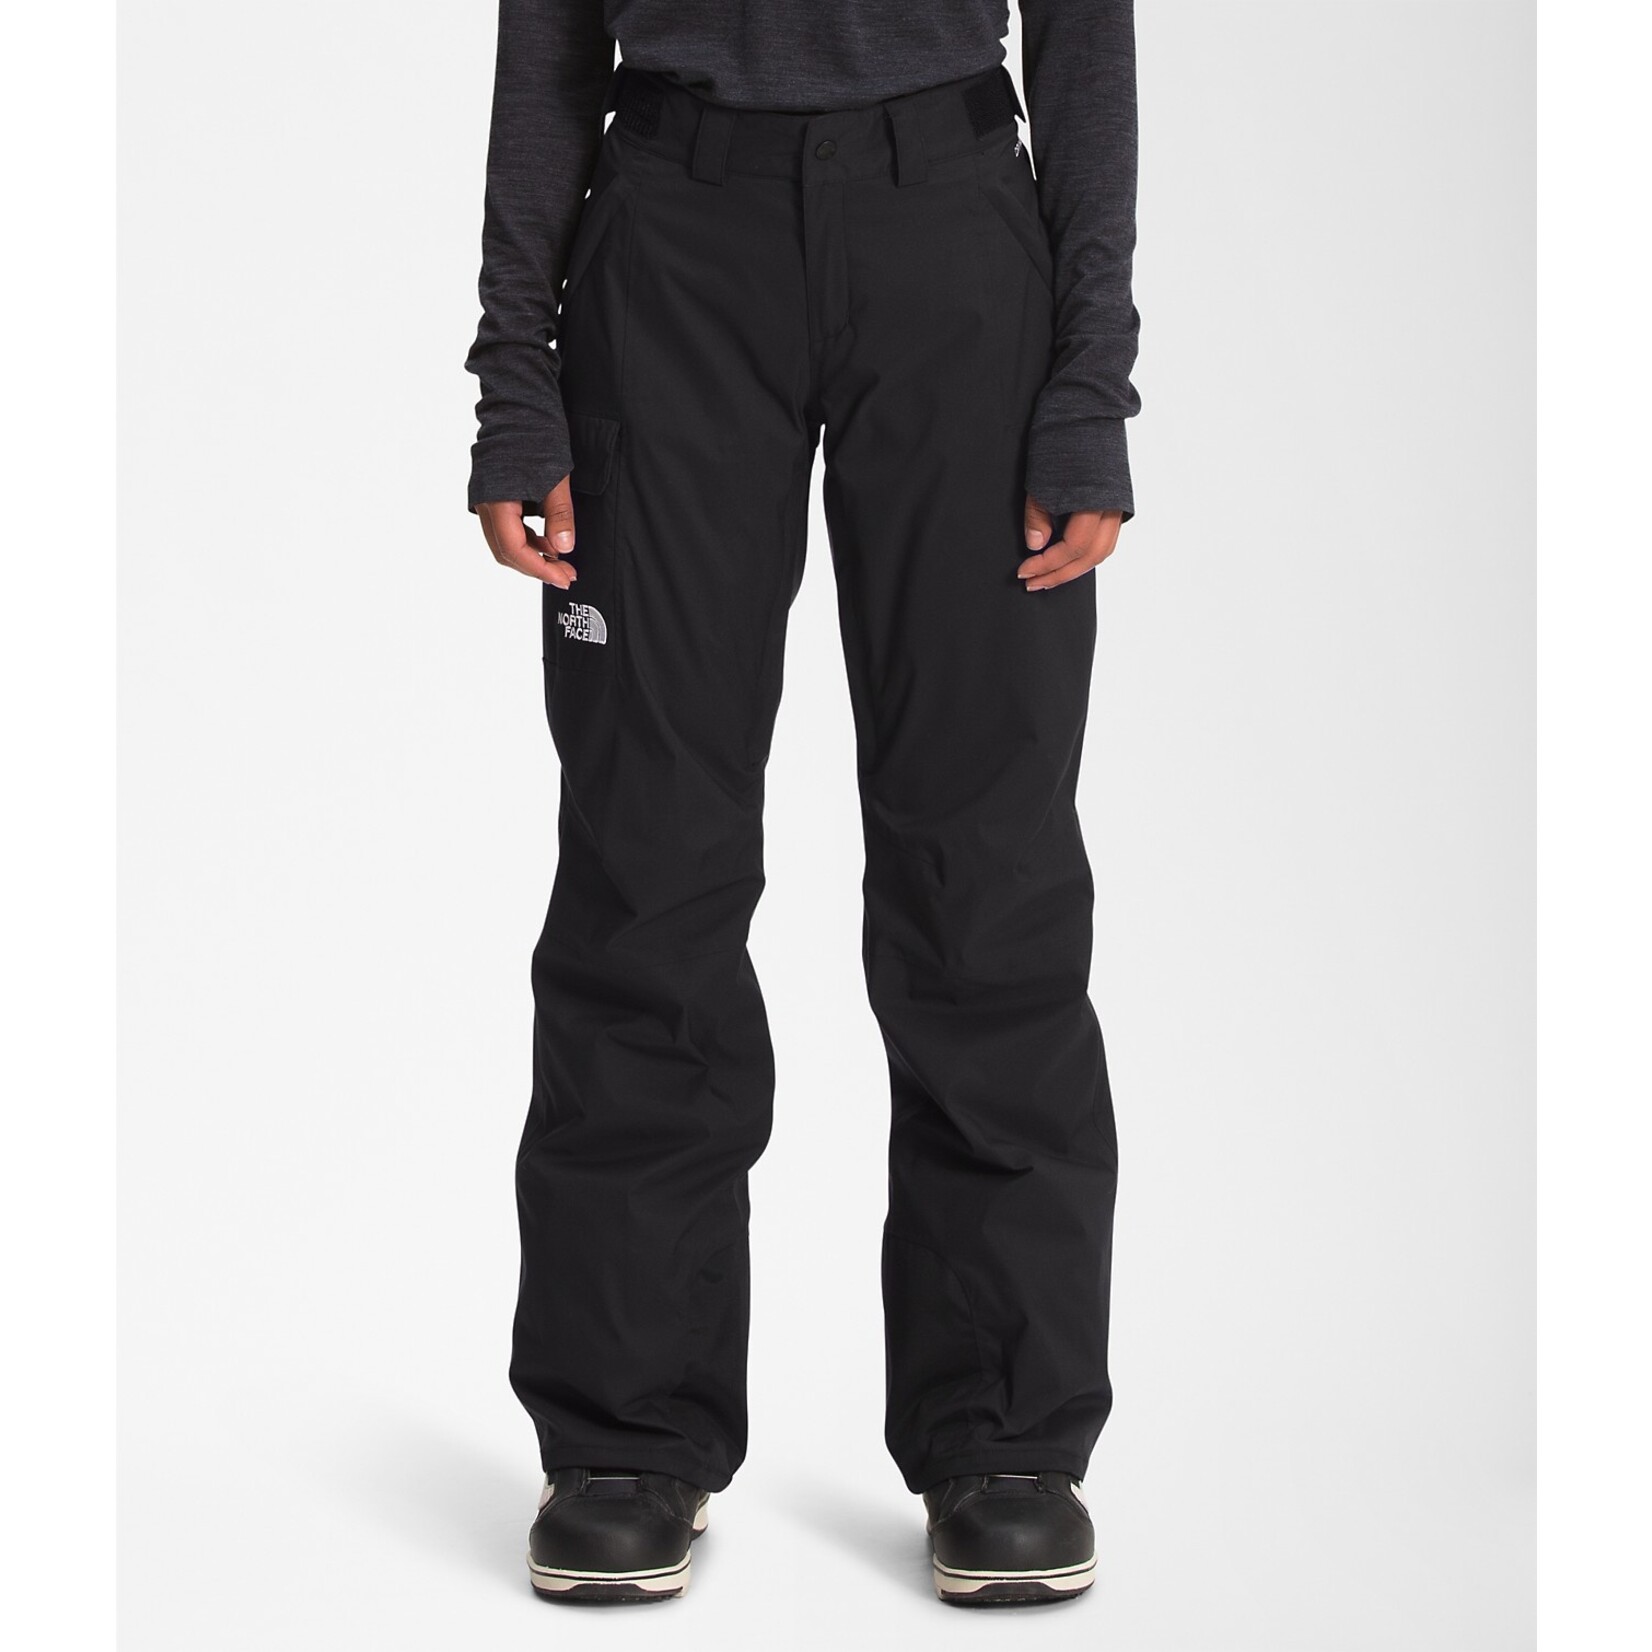 THE NORTH FACE THE NORTH FACE W FREEDOM INS PANT